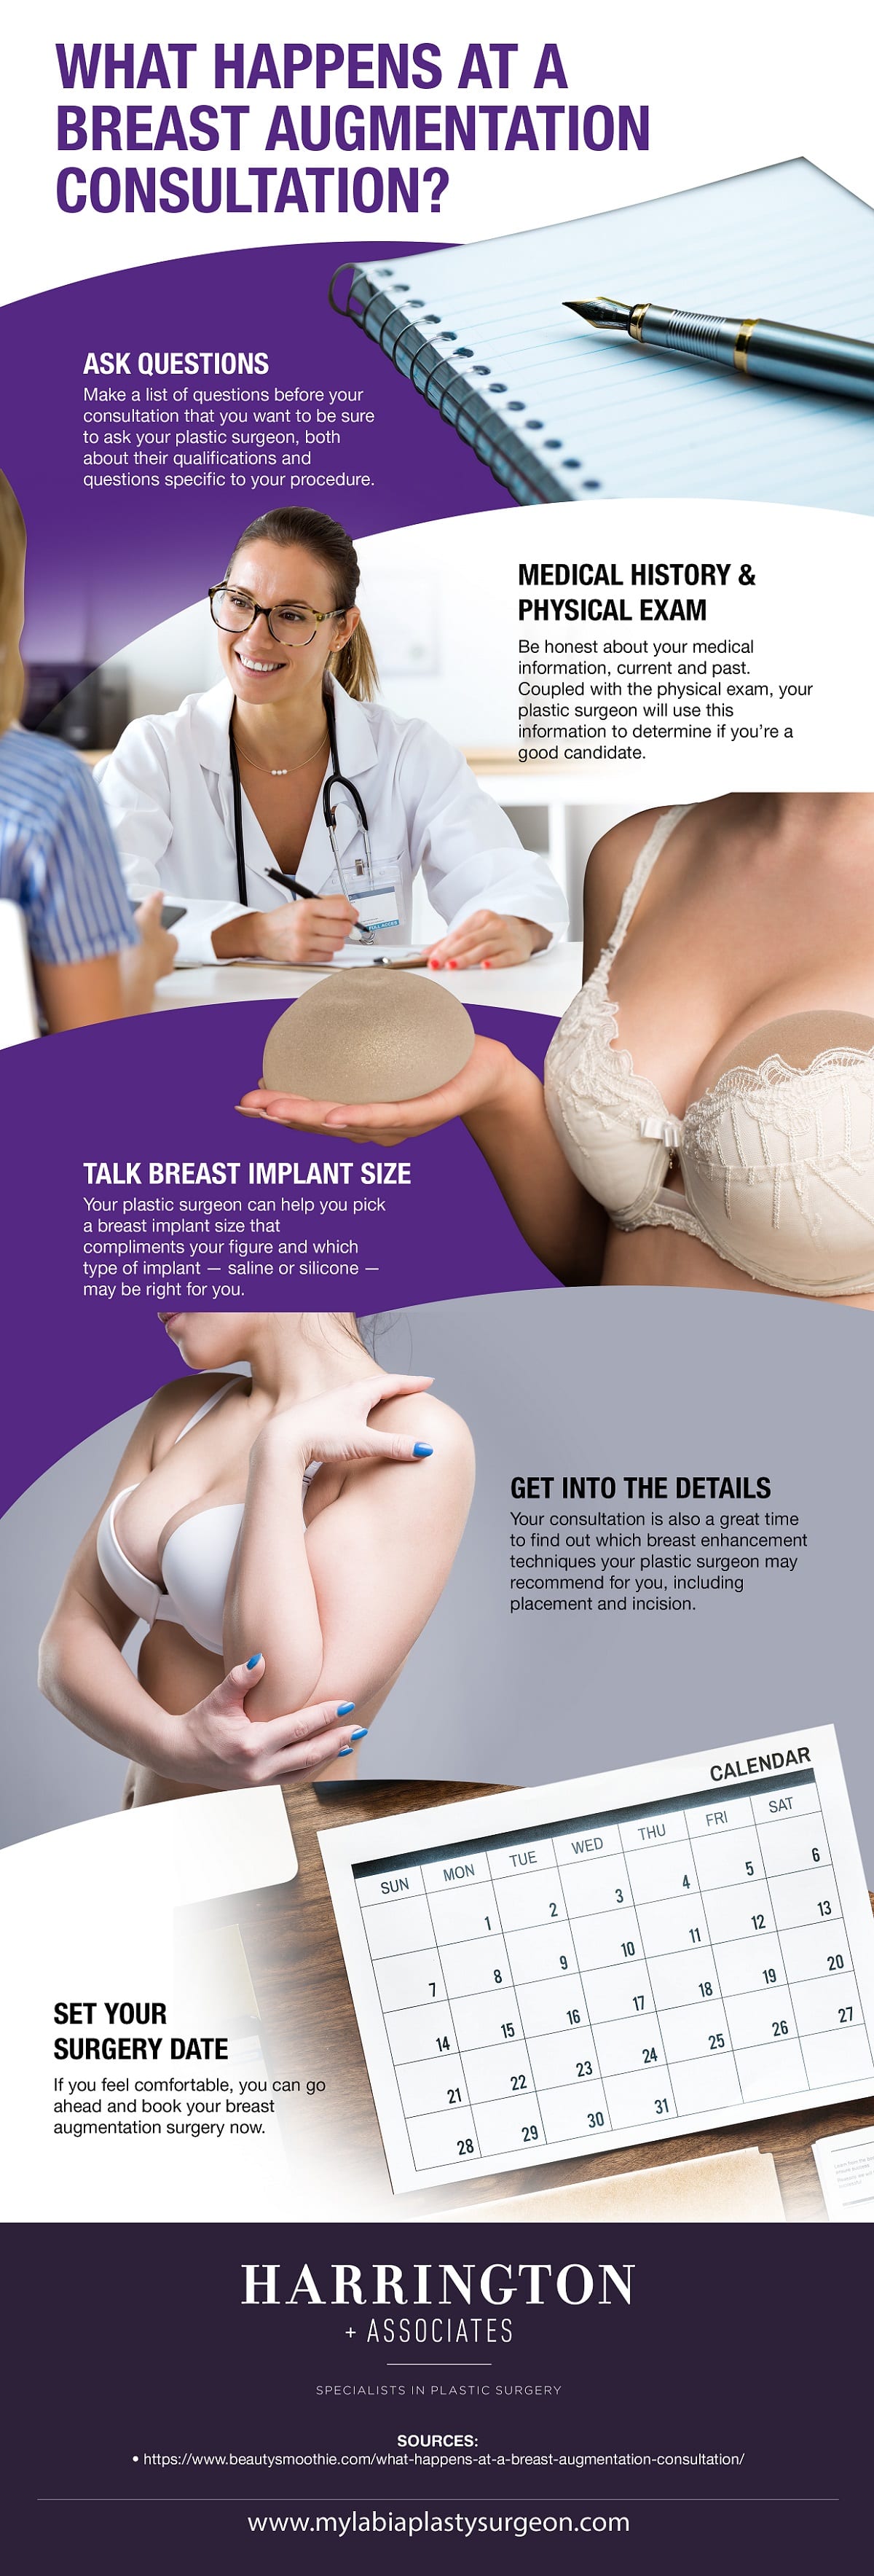 What Happens at a Breast Augmentation Consultation [Infographic] img 1